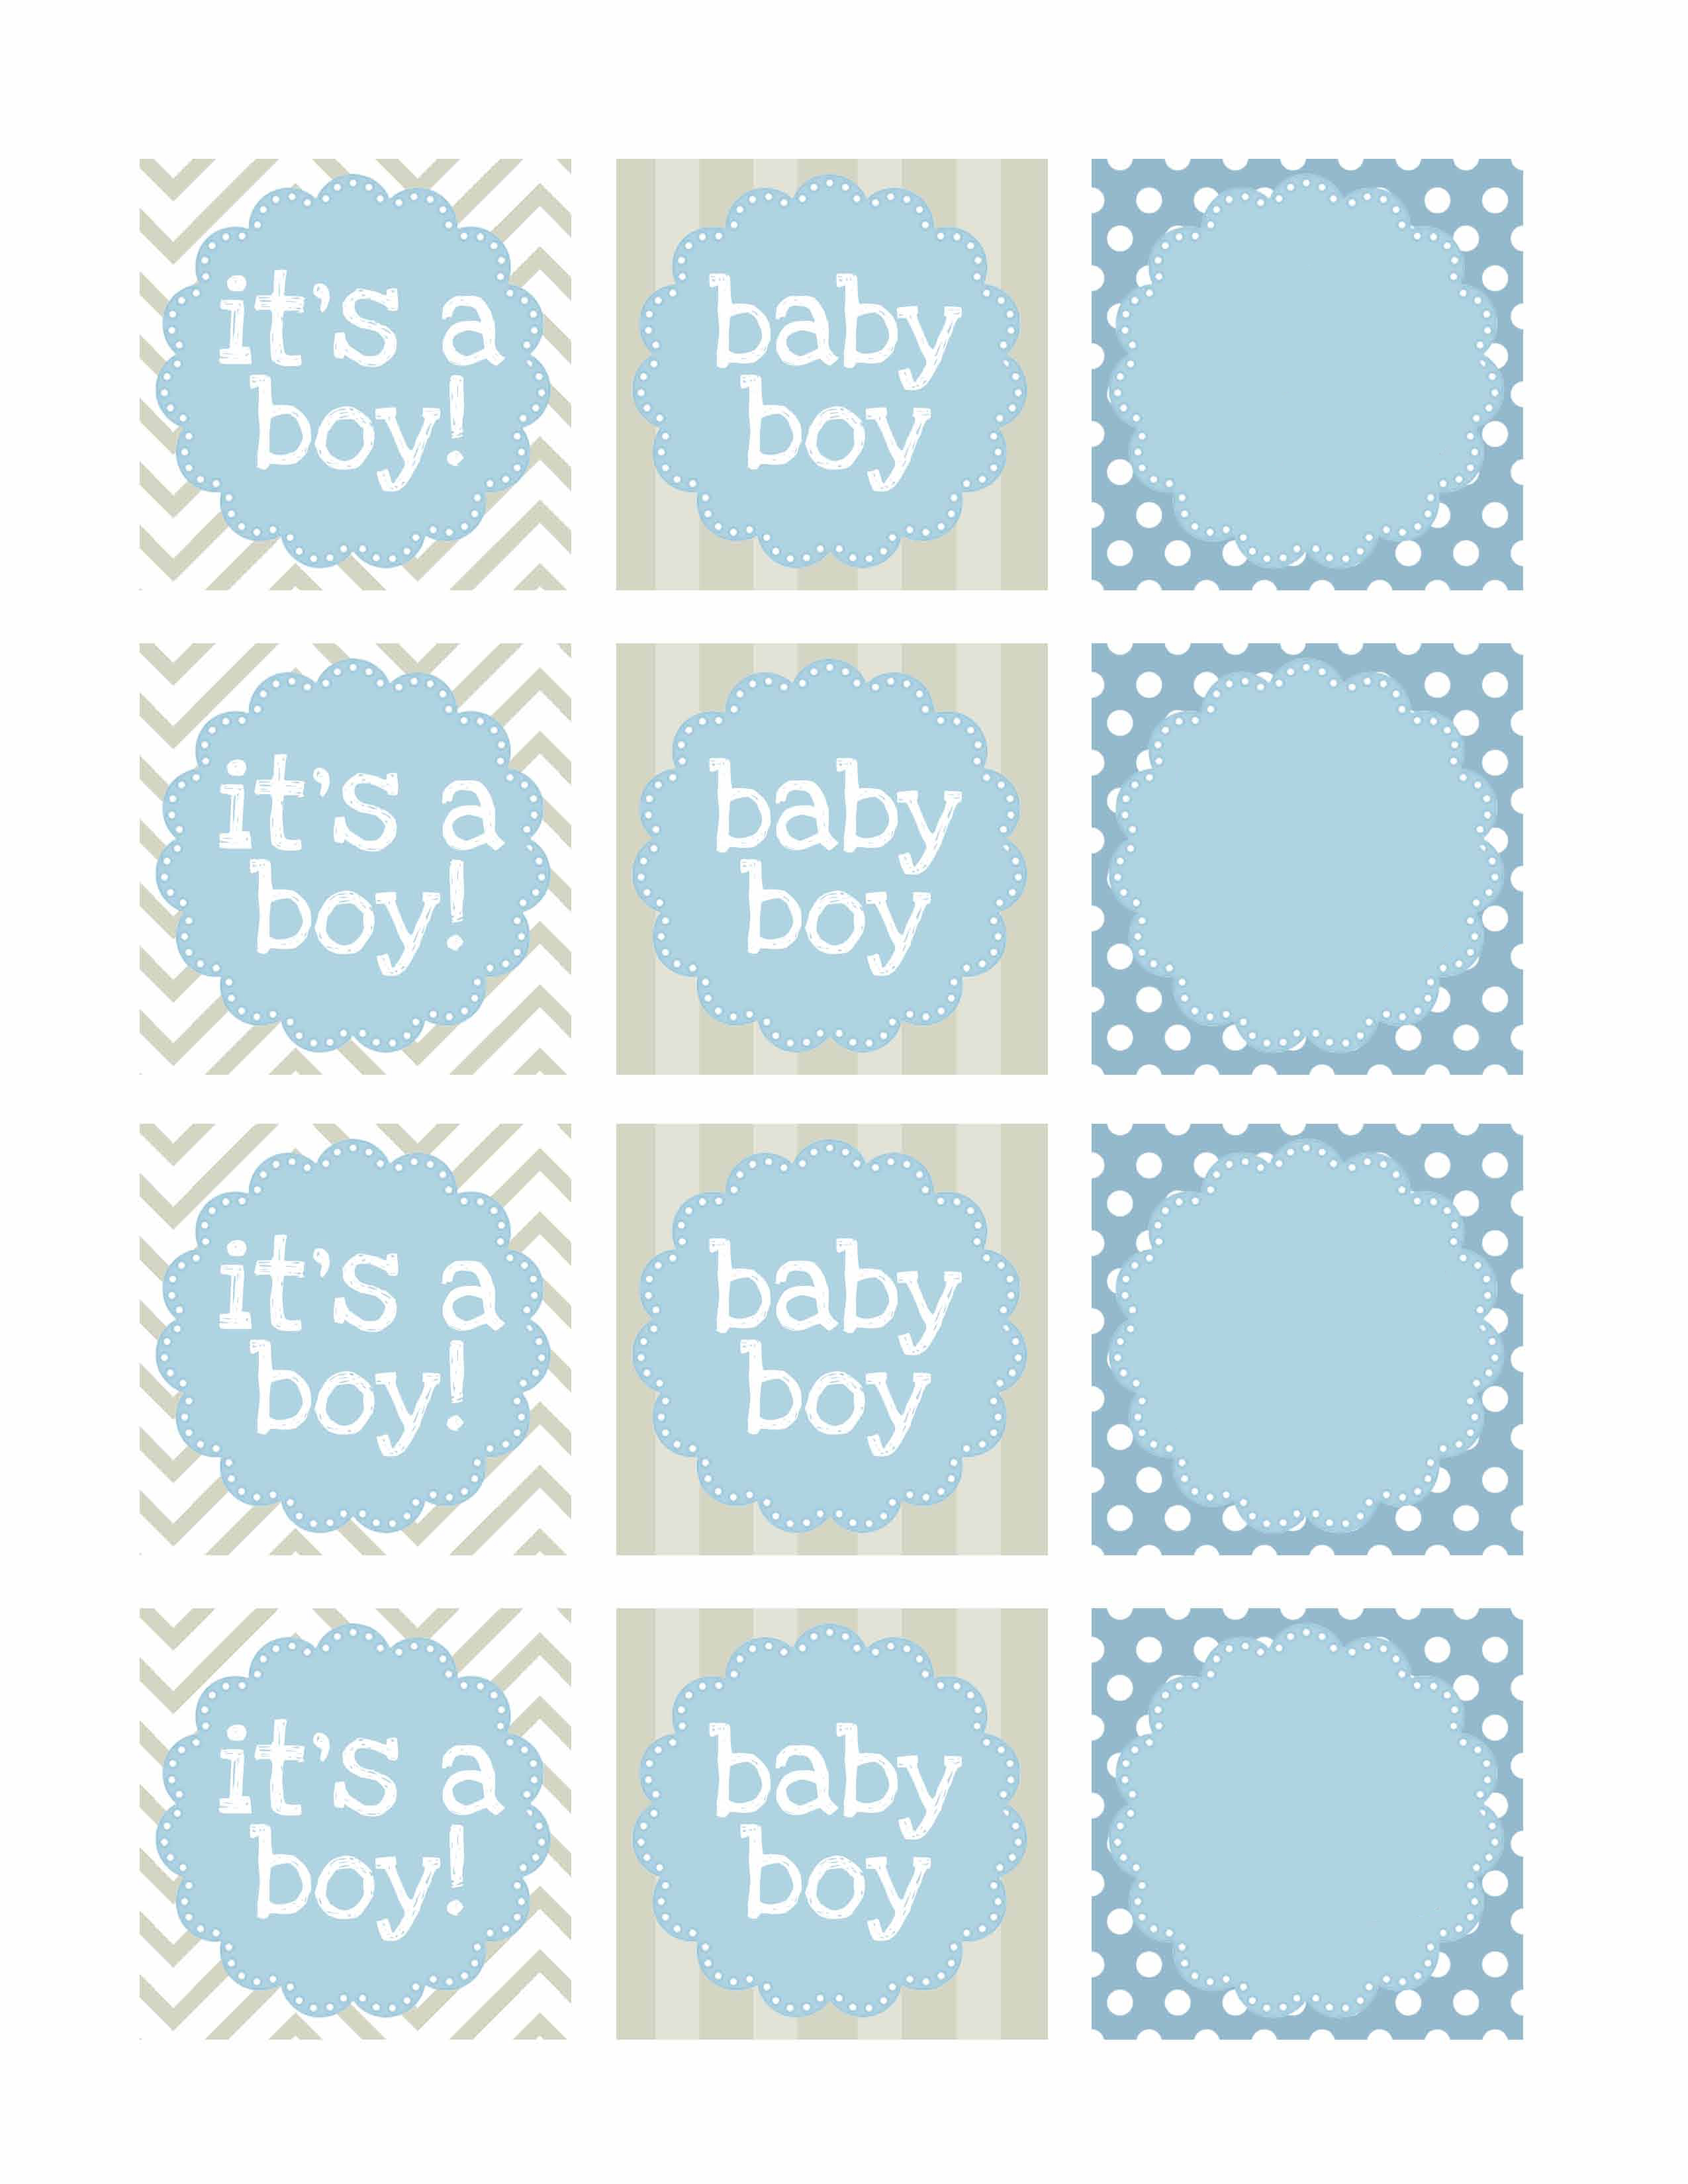 027 Favor Tags Template Ideas Free Baby Shower ~ Ulyssesroom - Free Printable Baby Shower Favor Tags